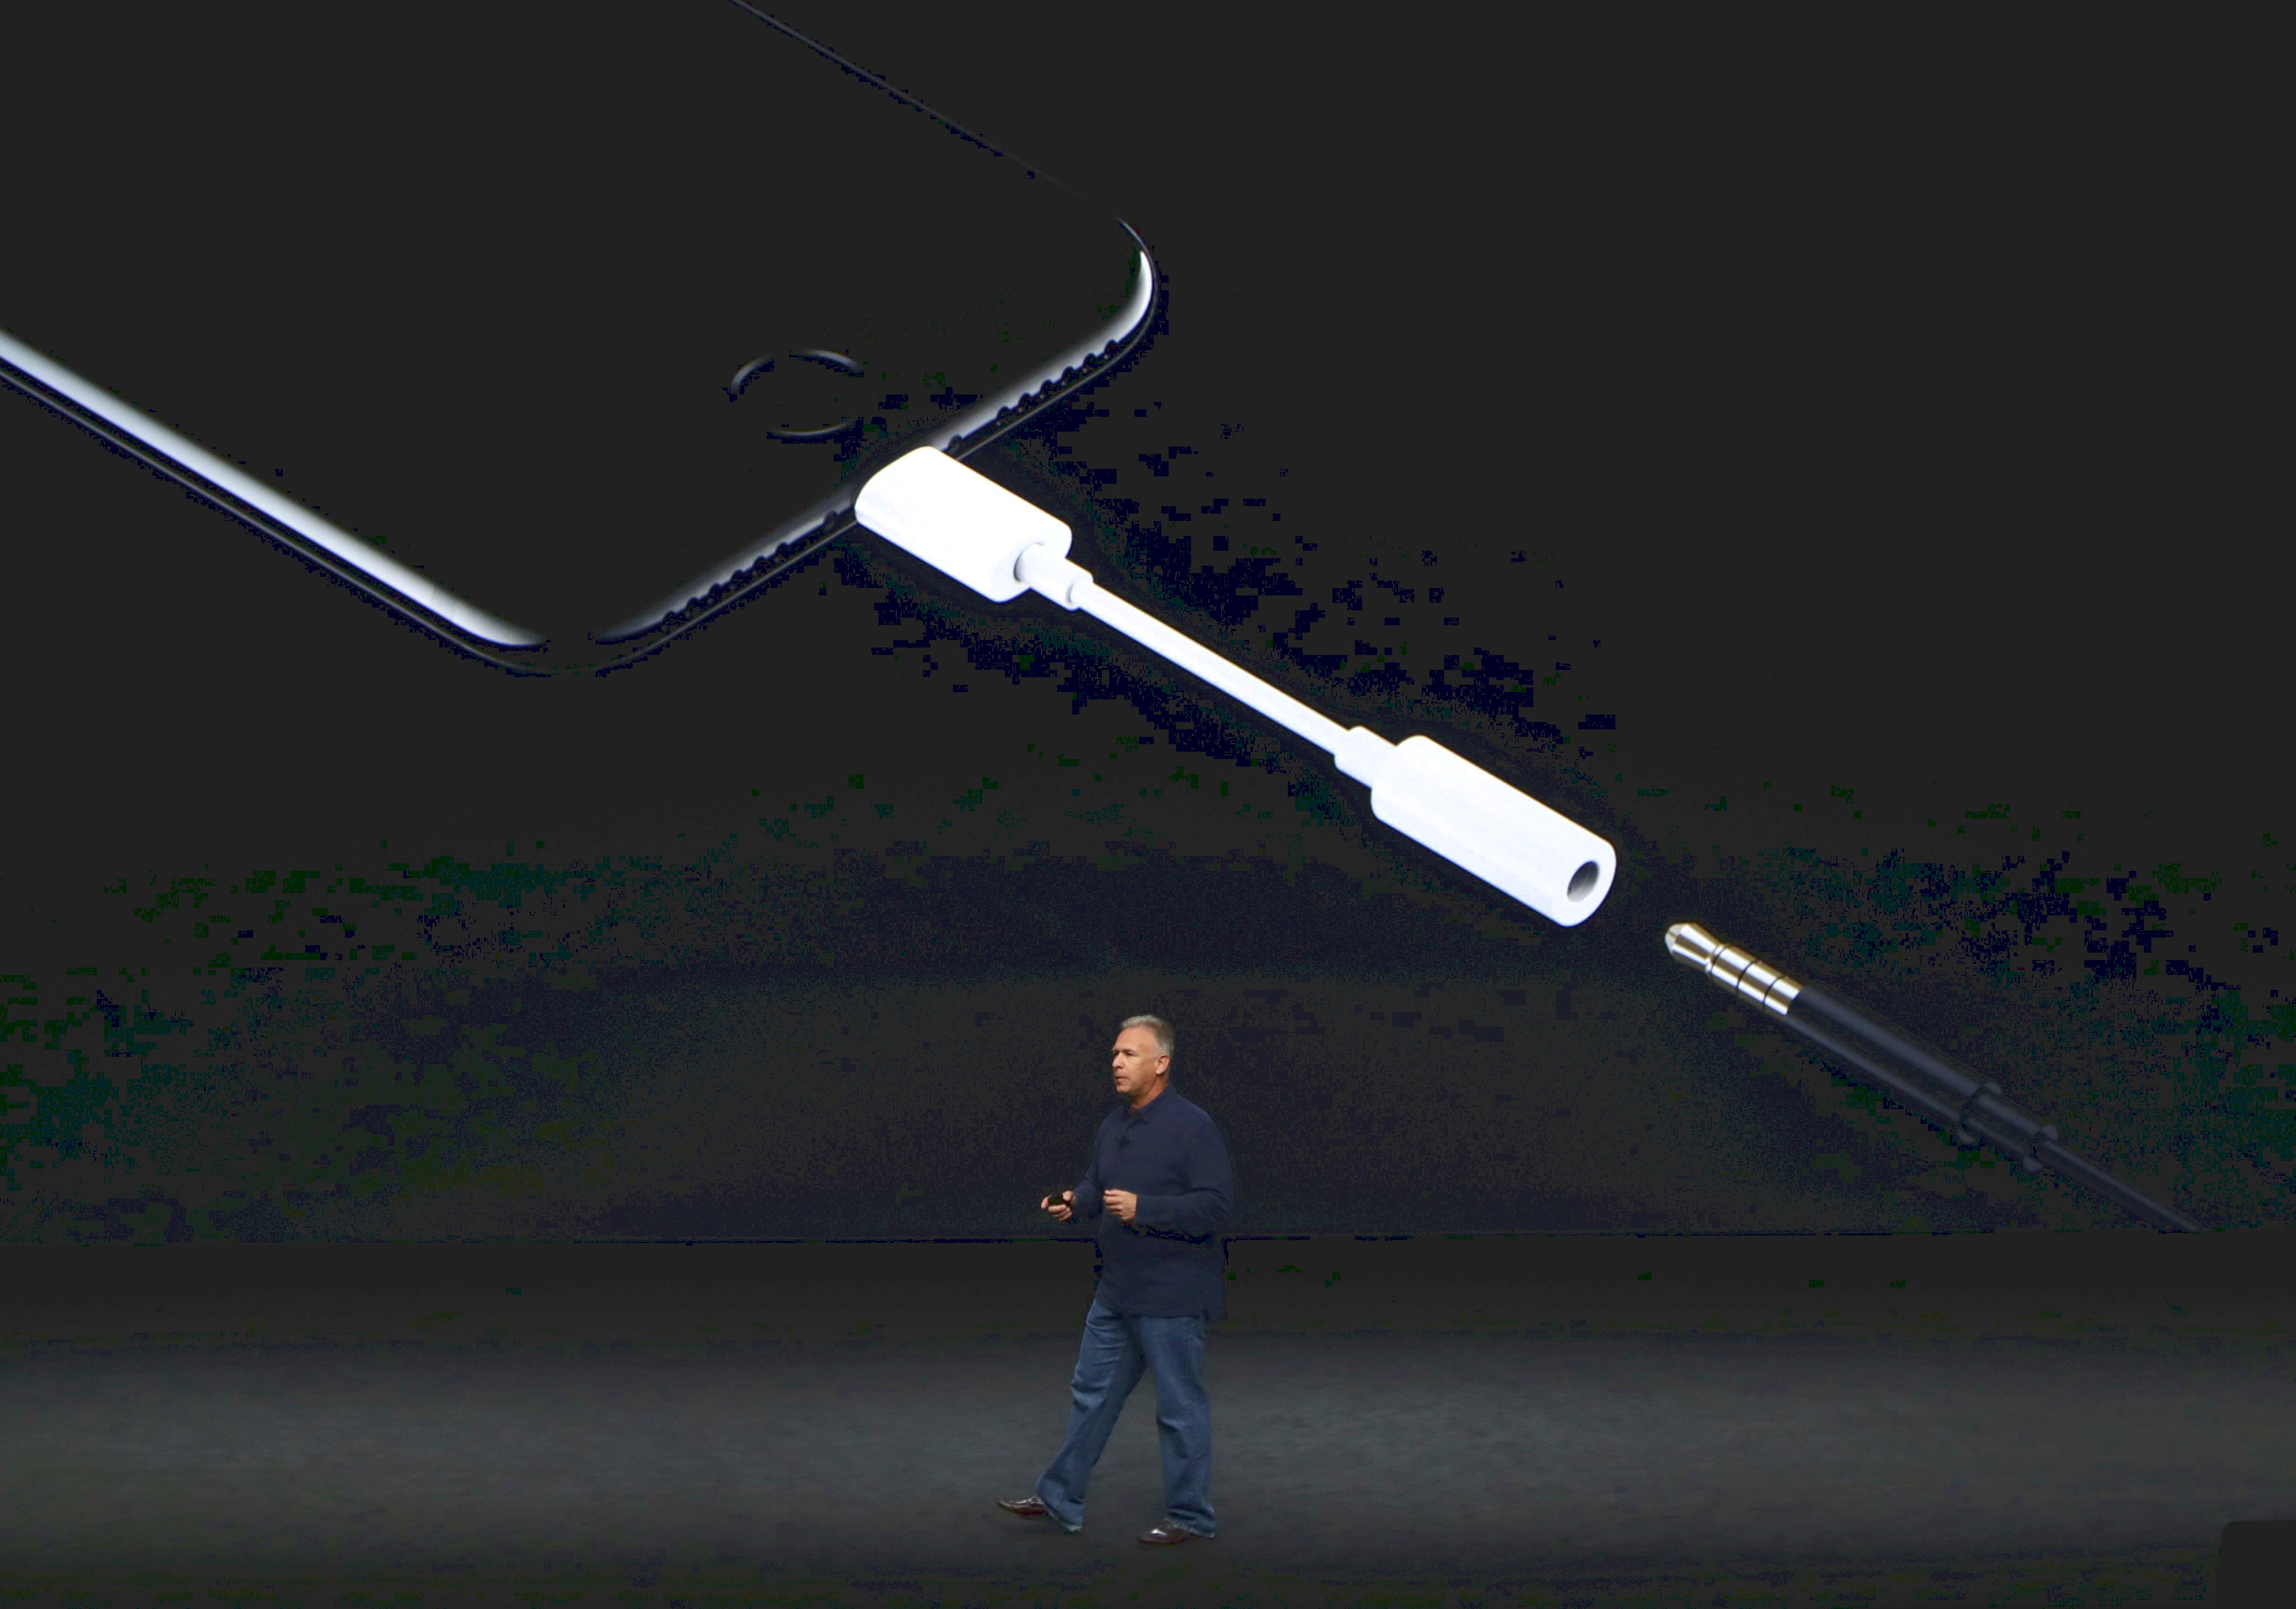 Phil Schiller, Apple' /></p>
<h3>Official iPhone 7! Apple Watch Series 2 and AirPods!</h3>
<p><center><iframe width=